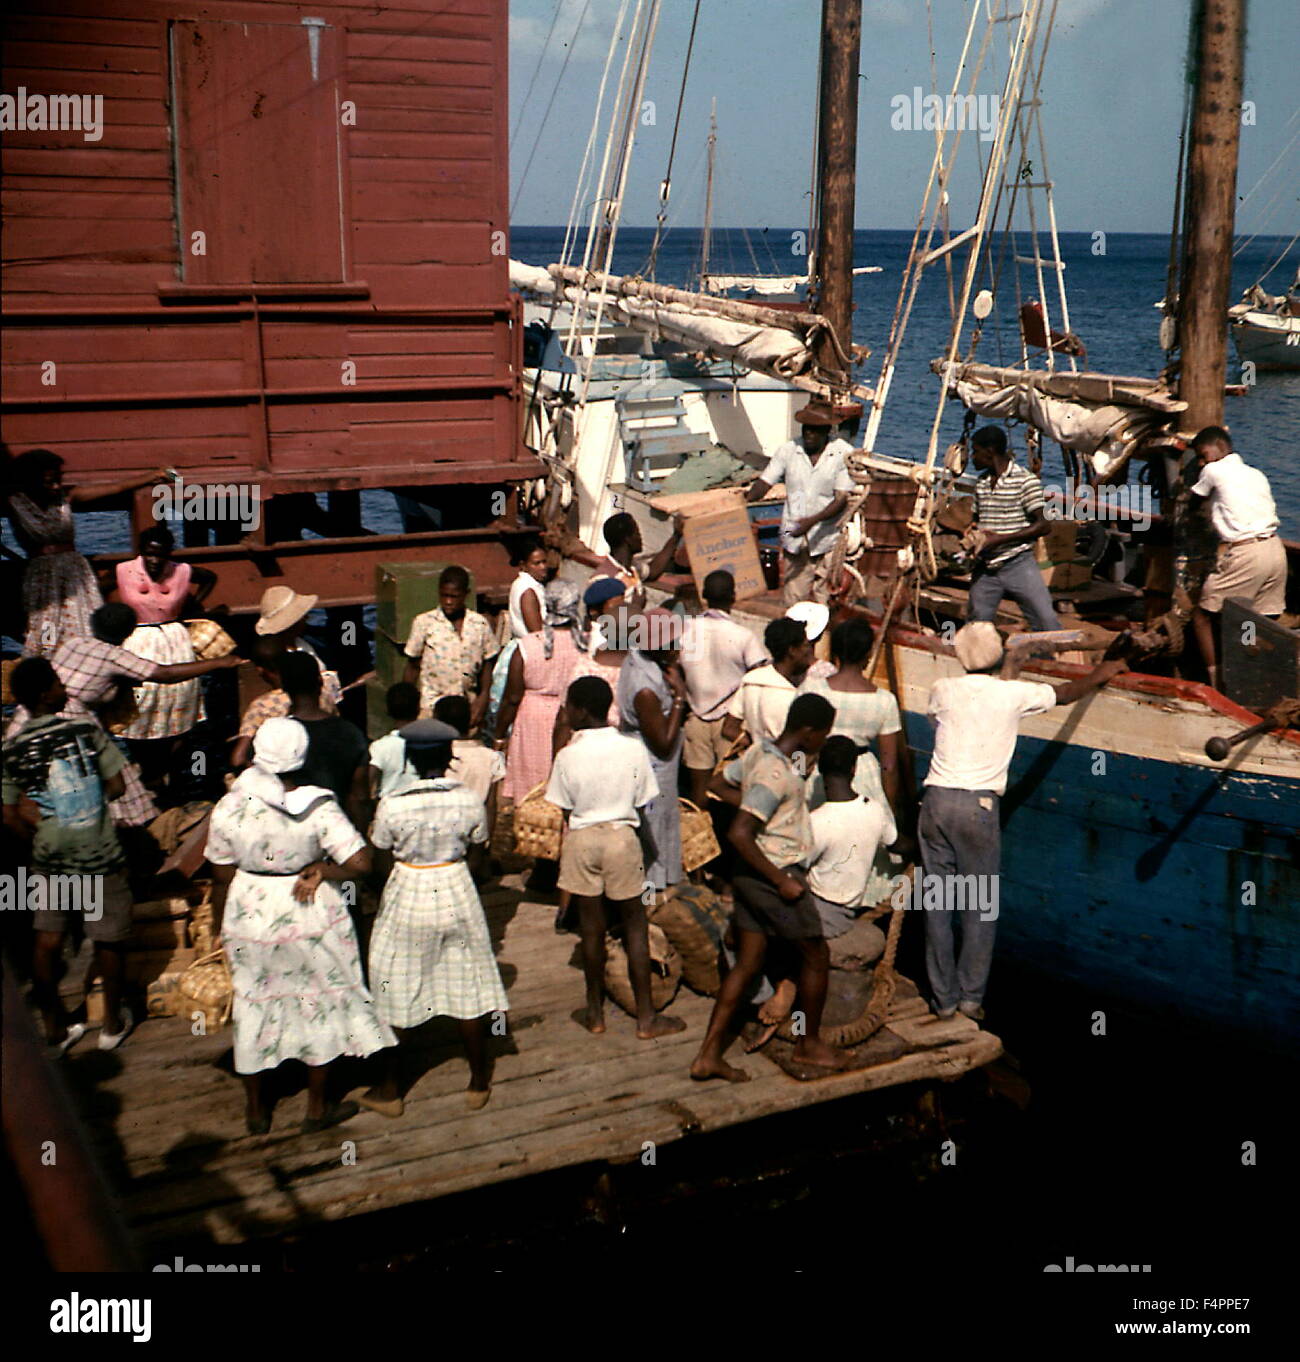 AJAXNETPHOTO. 1958. KINGSTOWN, ST.VINCENT, WEST INDIES.  - INTER ISLAND SHIPMENT OF GOODS ARRIVES - UNLOADING A SCHOONER. LIFE IN THE CARIBBEAN IN THE 1950S AND 60S.   PHOTO: REG CALVERT/AJAX   ©AJAX NEWS & FEATURE SERVICE/REG CALVERT COLLECTION   REF:RC07. Stock Photo